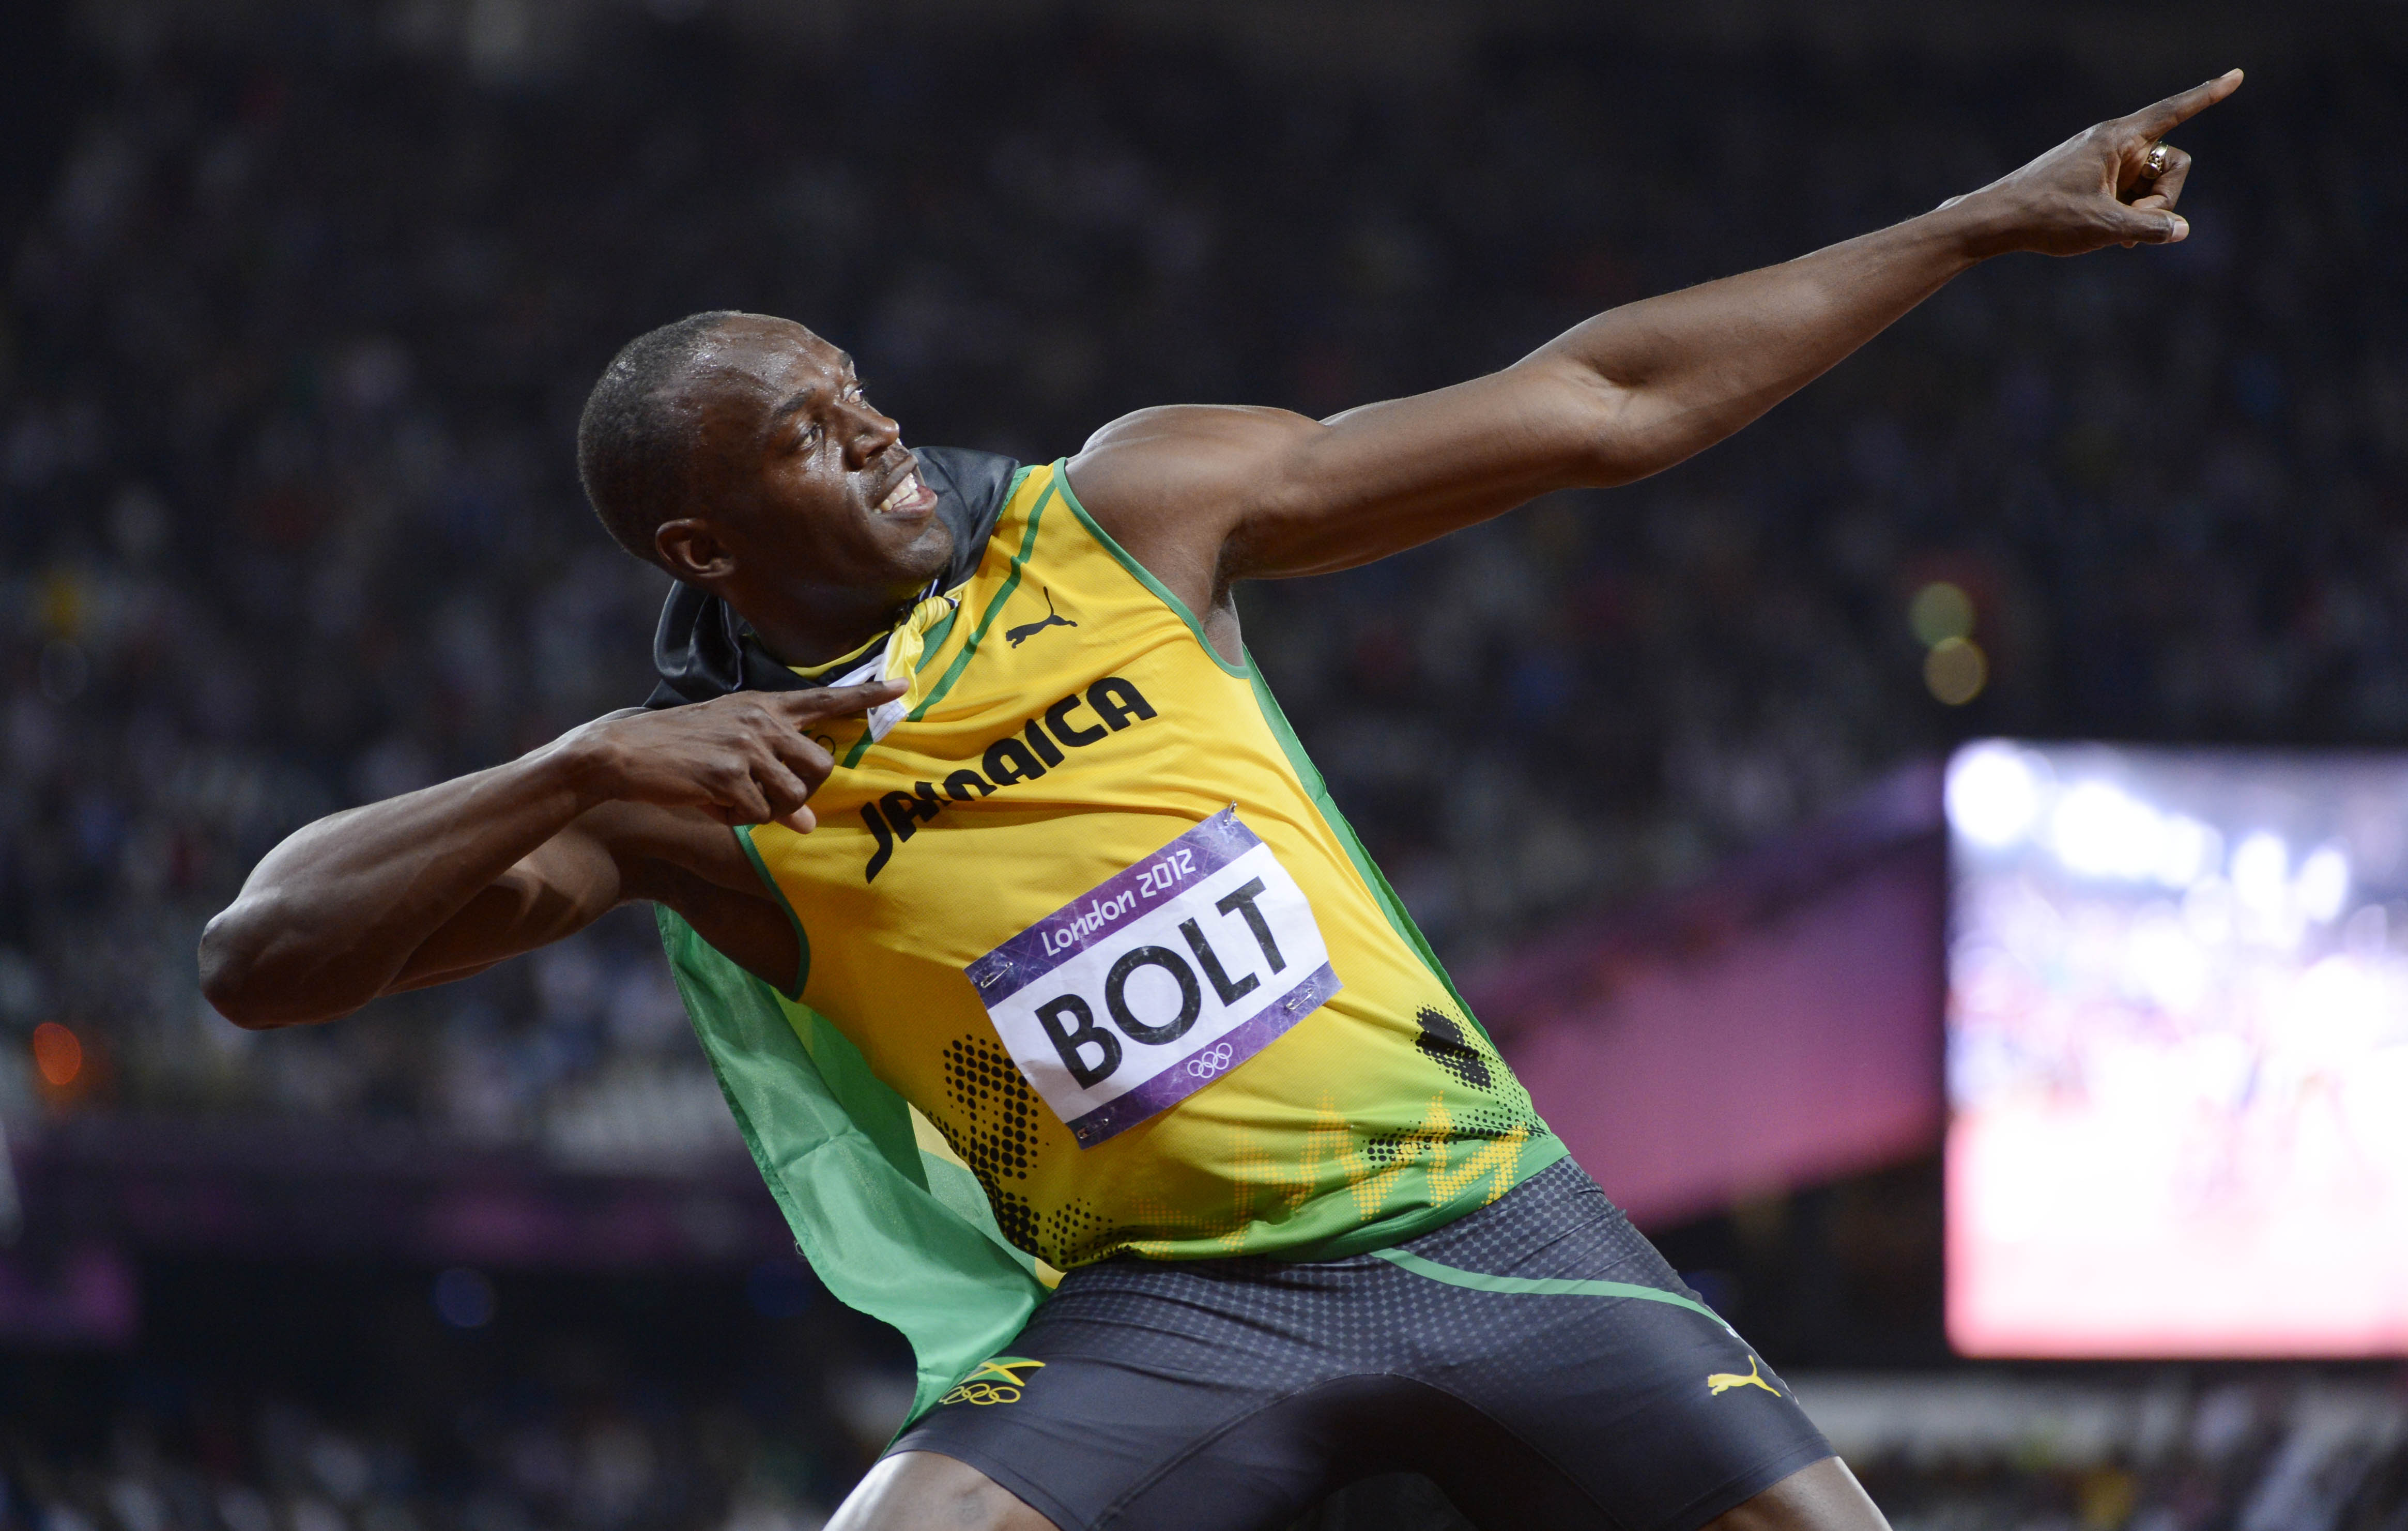 Rio Olympics 2016: Pictures of Usain Bolt making history yet again at Rio  will give you adrenaline rush